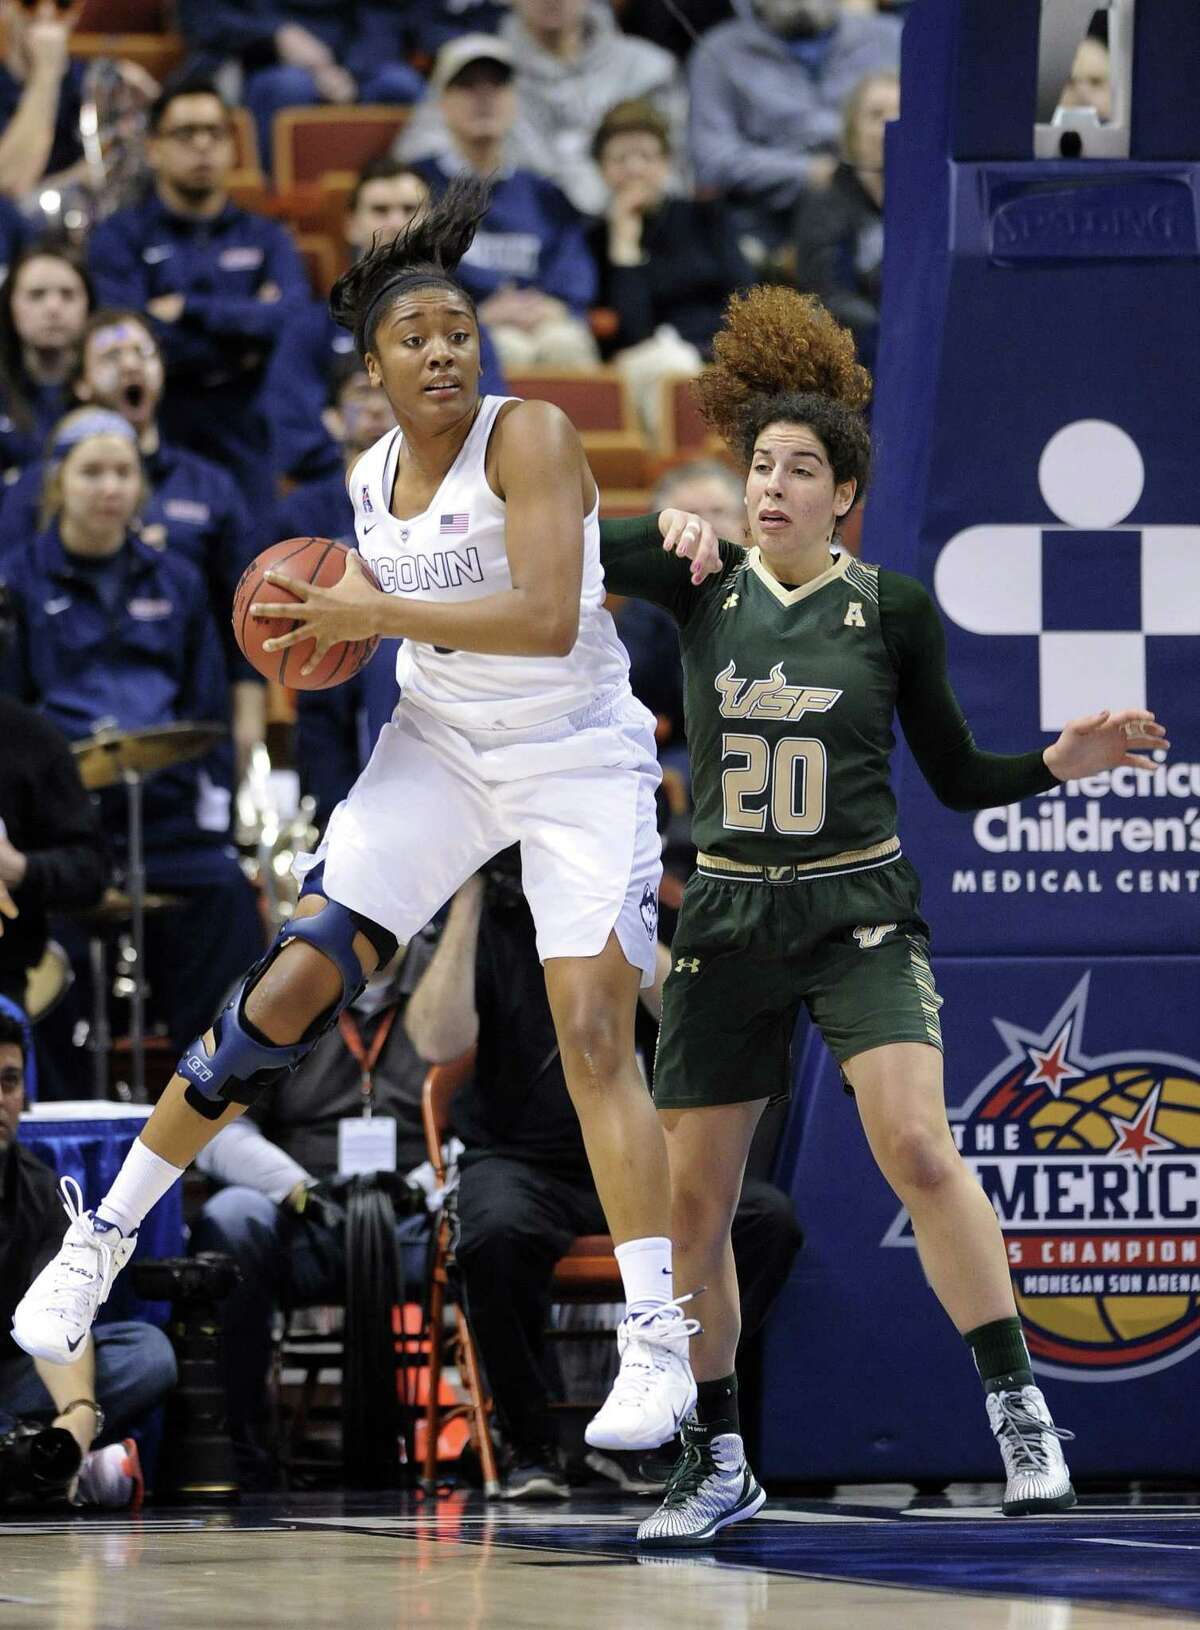 UConn’s Morgan Tuck grabs a rebound during a recent game against USF.